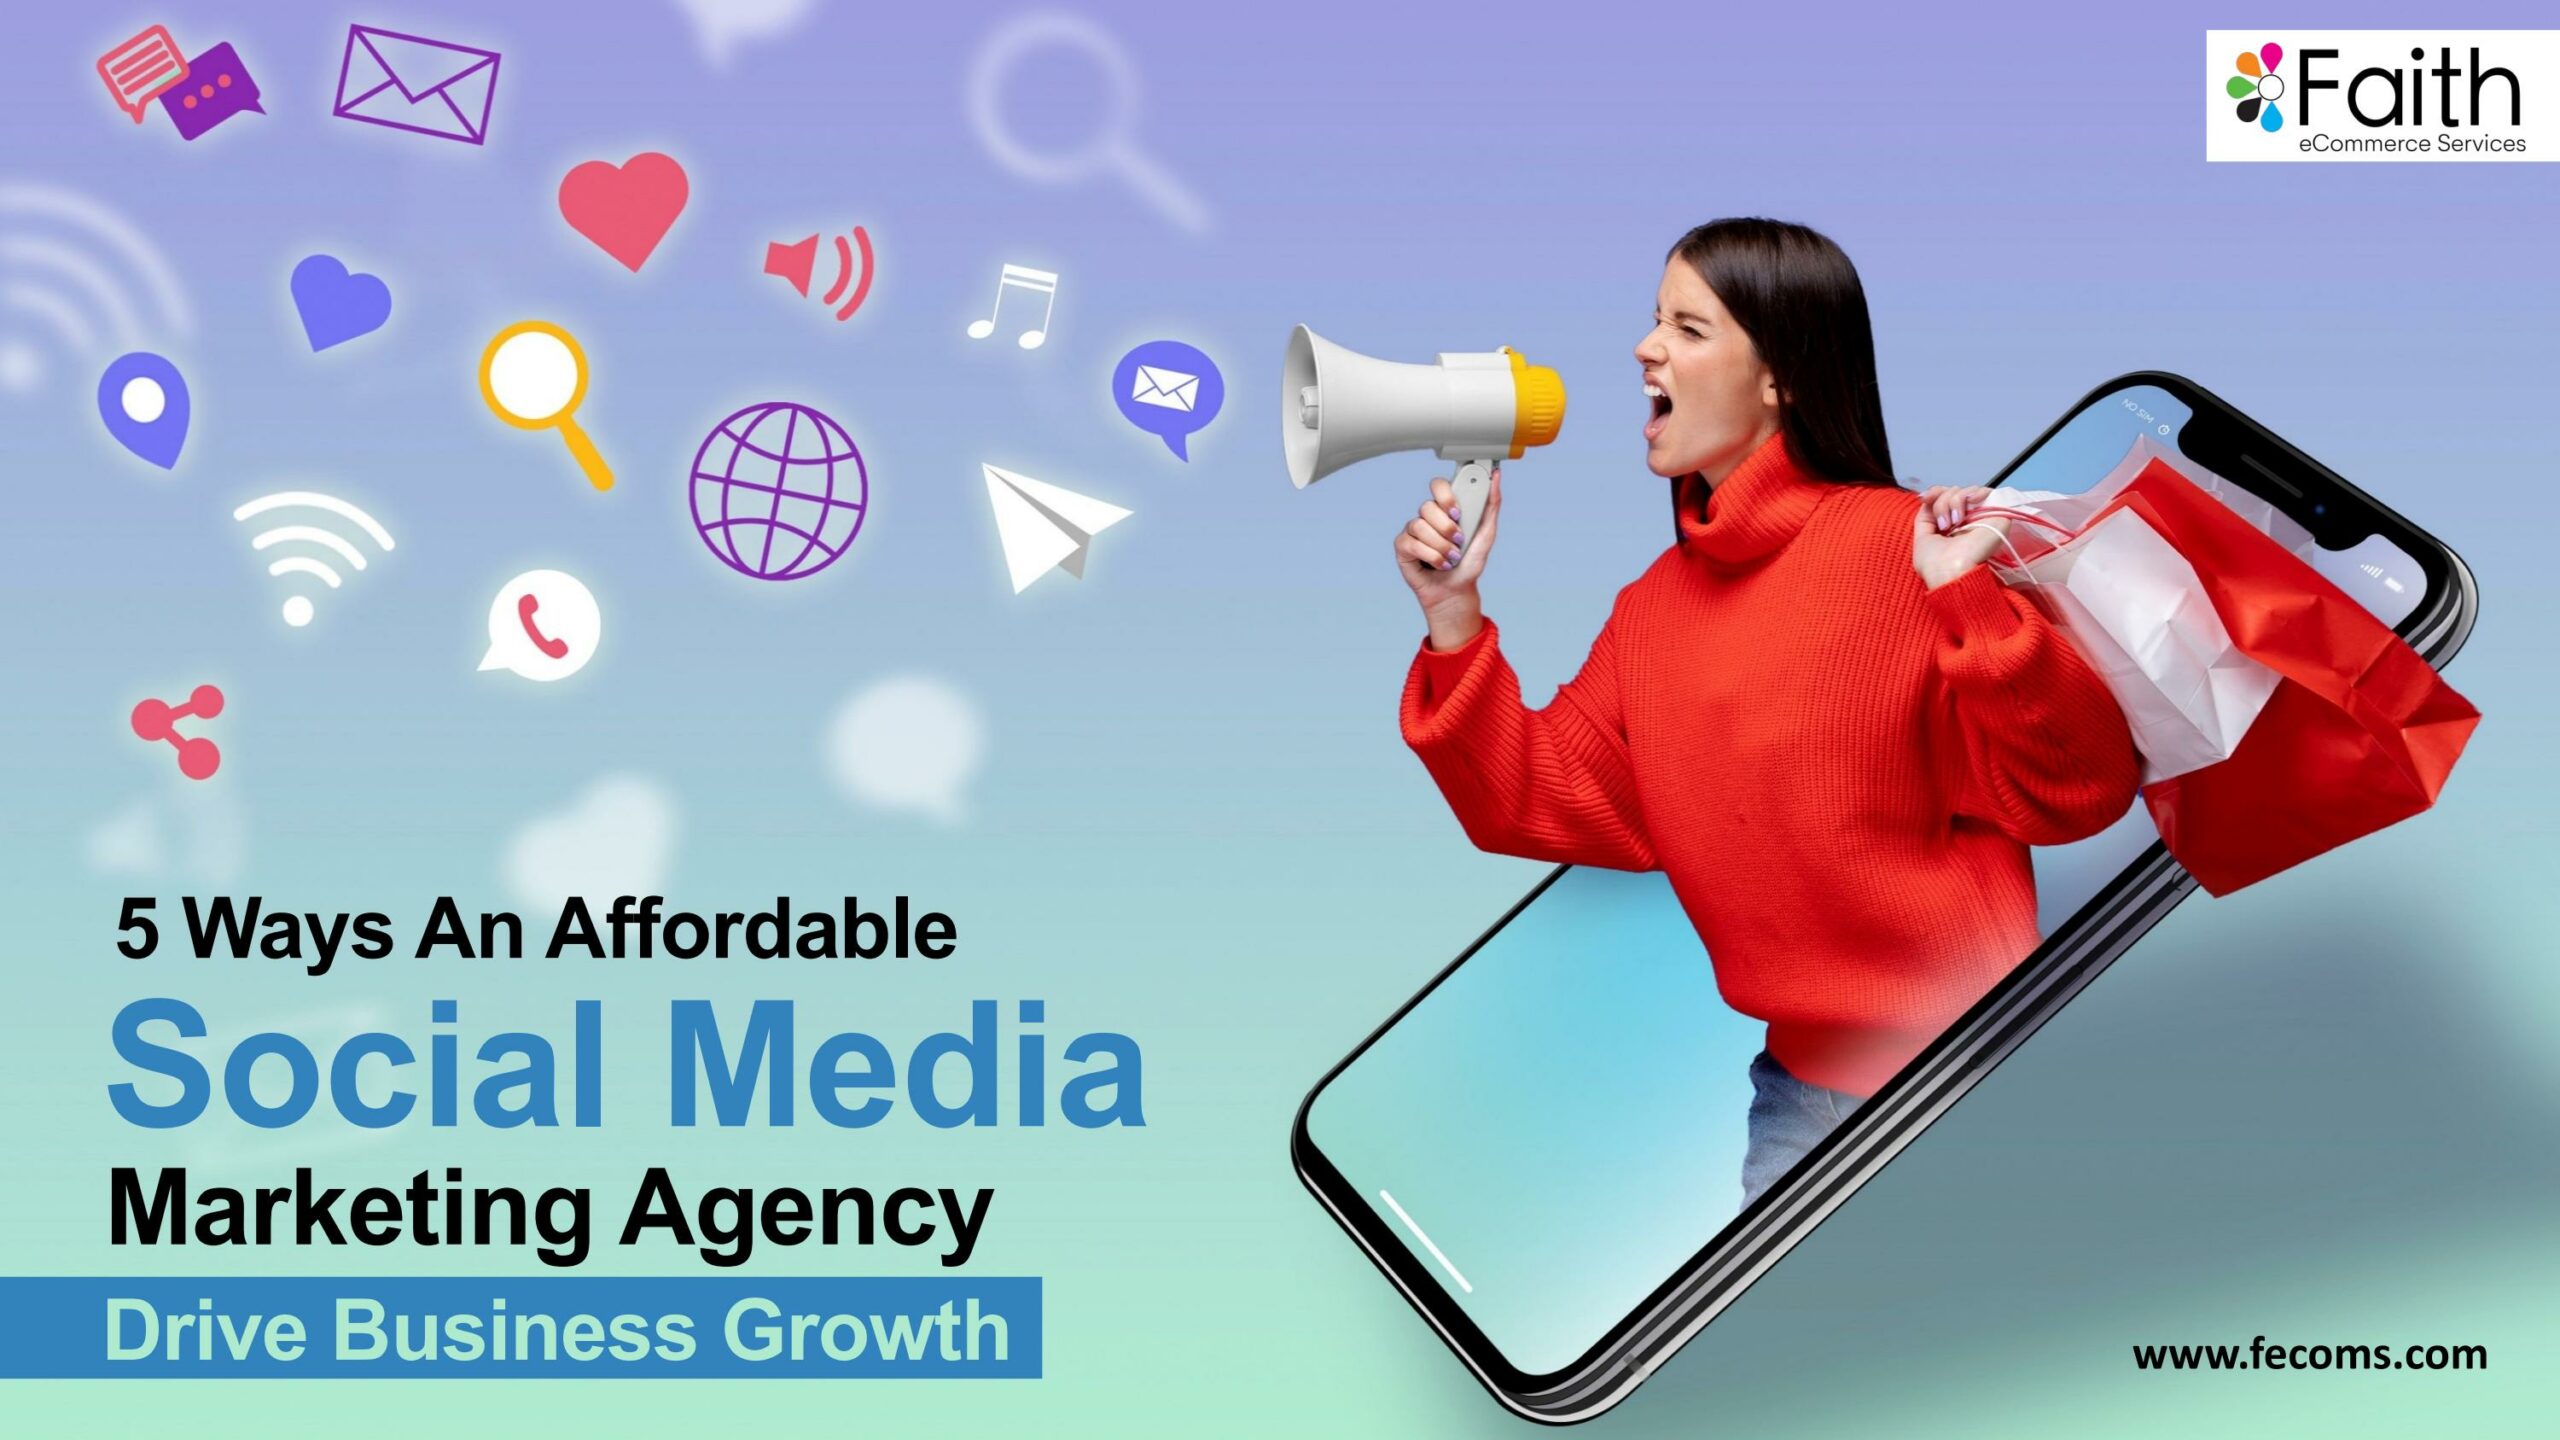 Social Media Marketing Agency for Business Growth